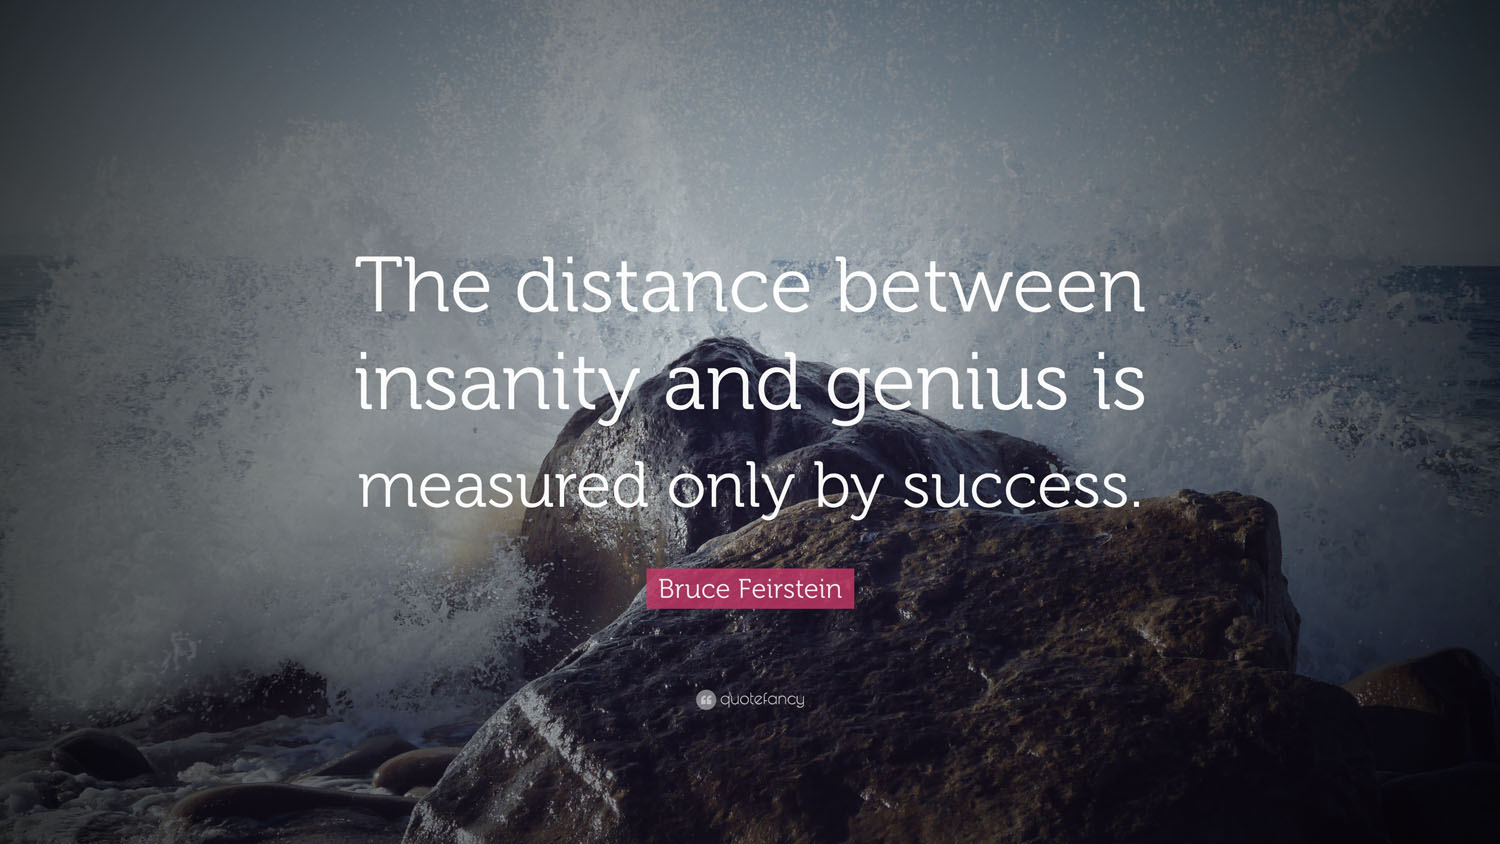 The distance between insanity and genius is measured only by success. (2)